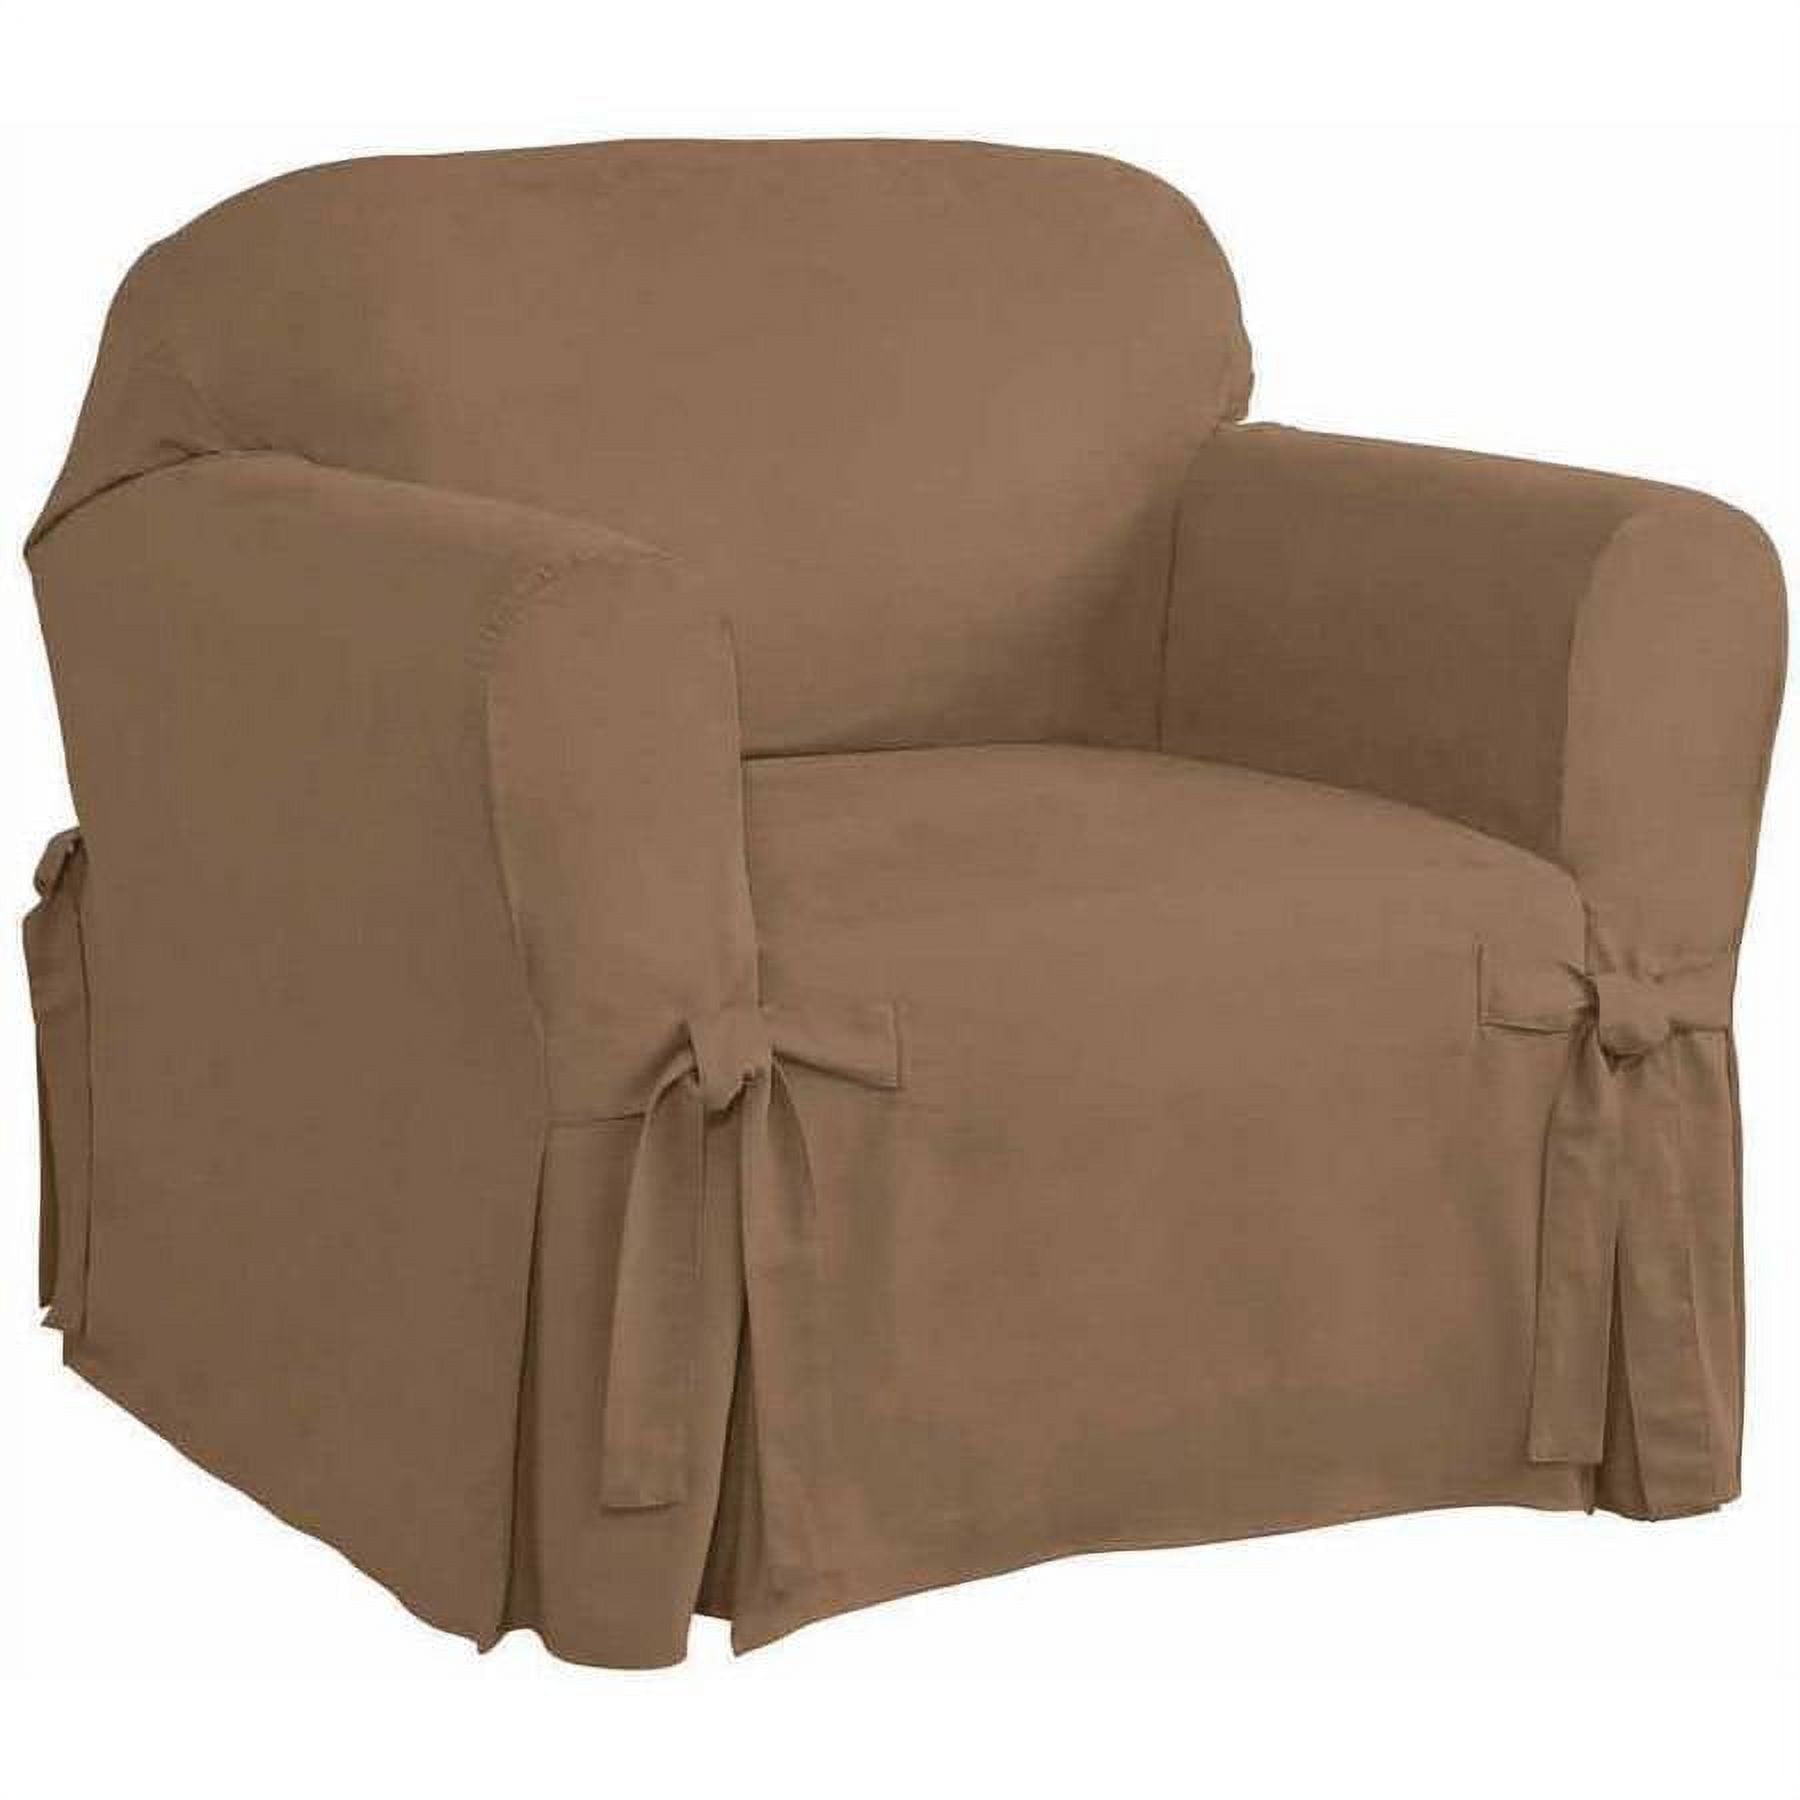 Serta Relaxed Fit Smooth Suede Furniture Slipcover Chair 1 Piece Box Cushion 83115757 D69a 49b0 9ee0 F7c695e40675.86e30b606f23c8e8ac91041b1c1390ce 